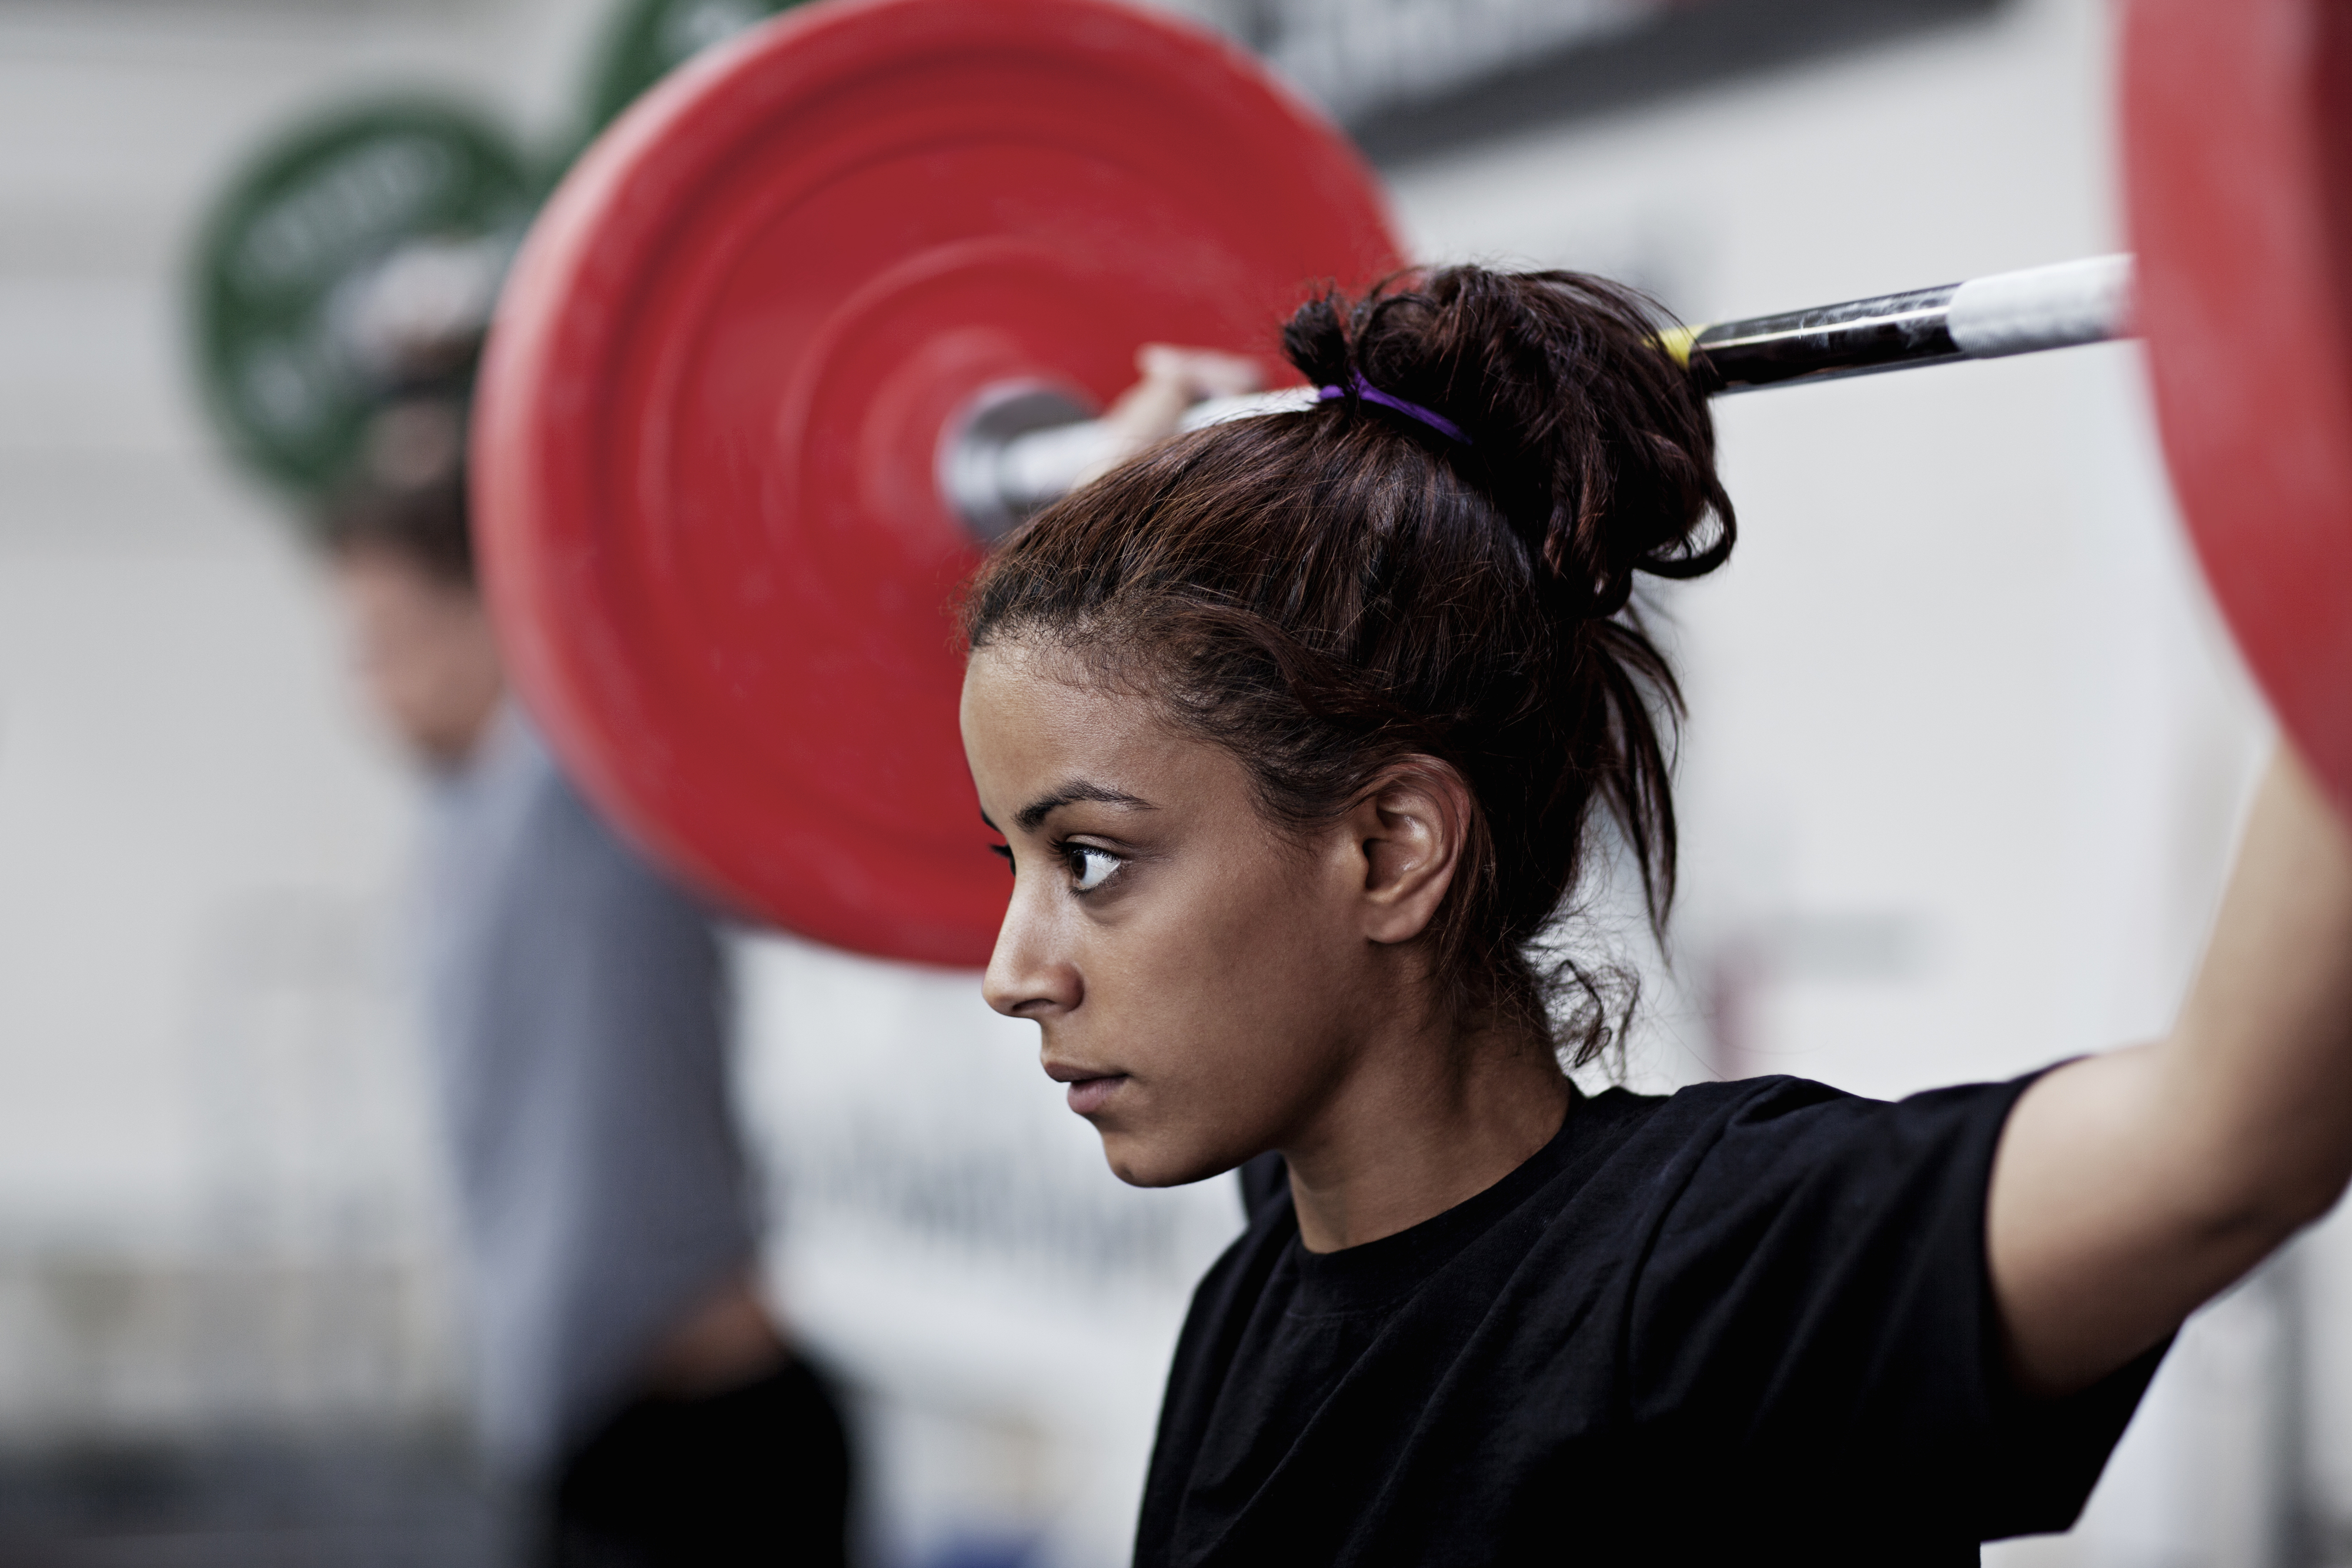 Woman lifting a barbell overhead in a gym setting, focused expression